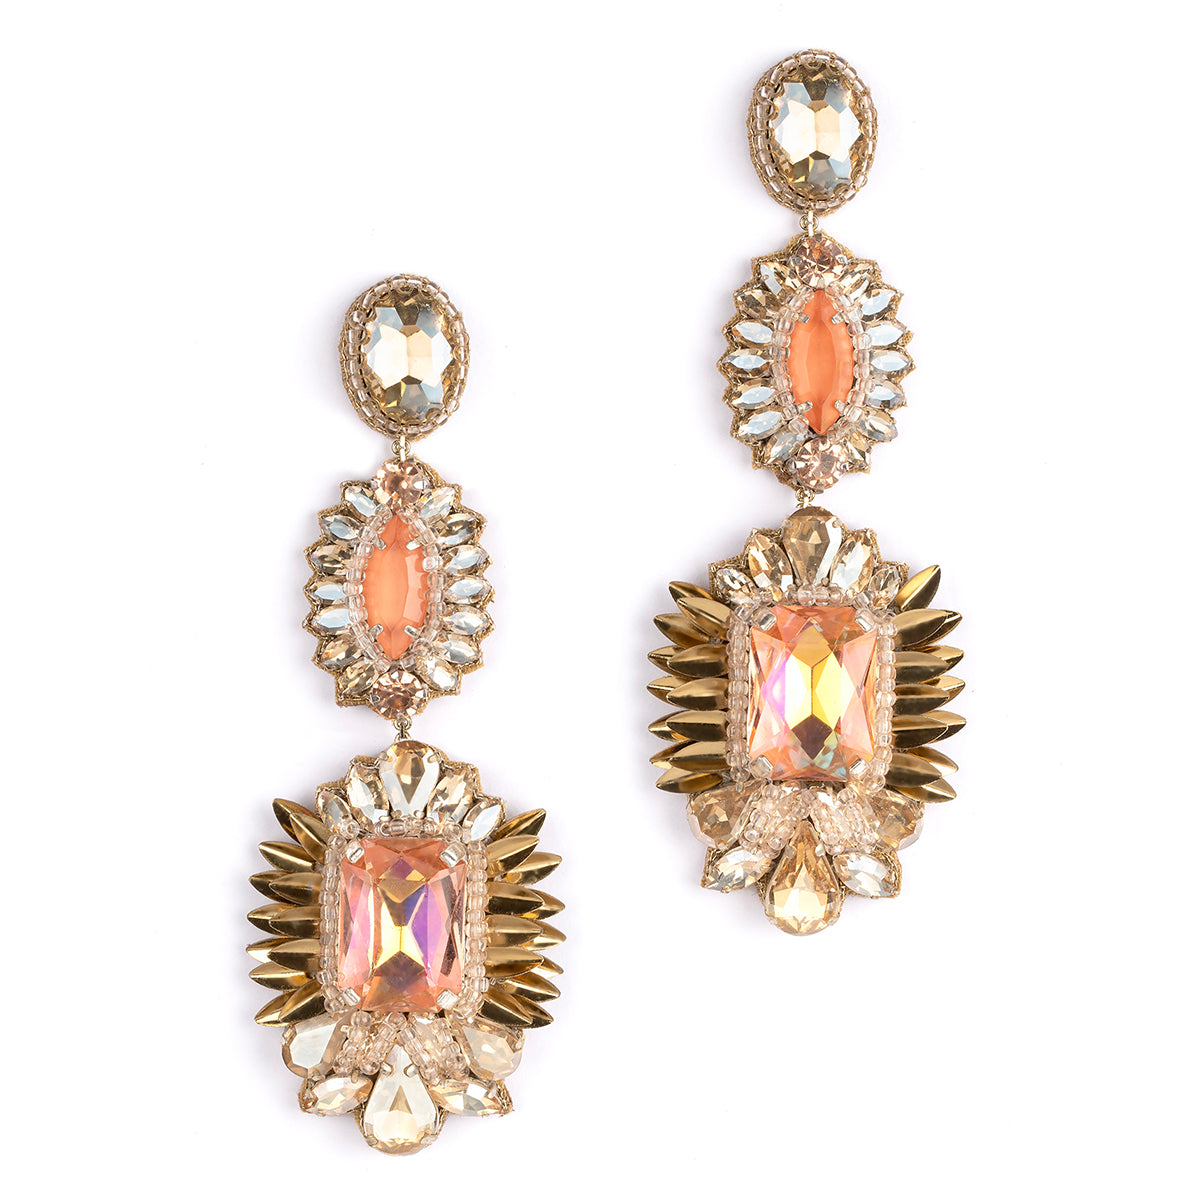 Buy Shoshaa Gold and Peach-Coloured Mirror Drop Earrings Online